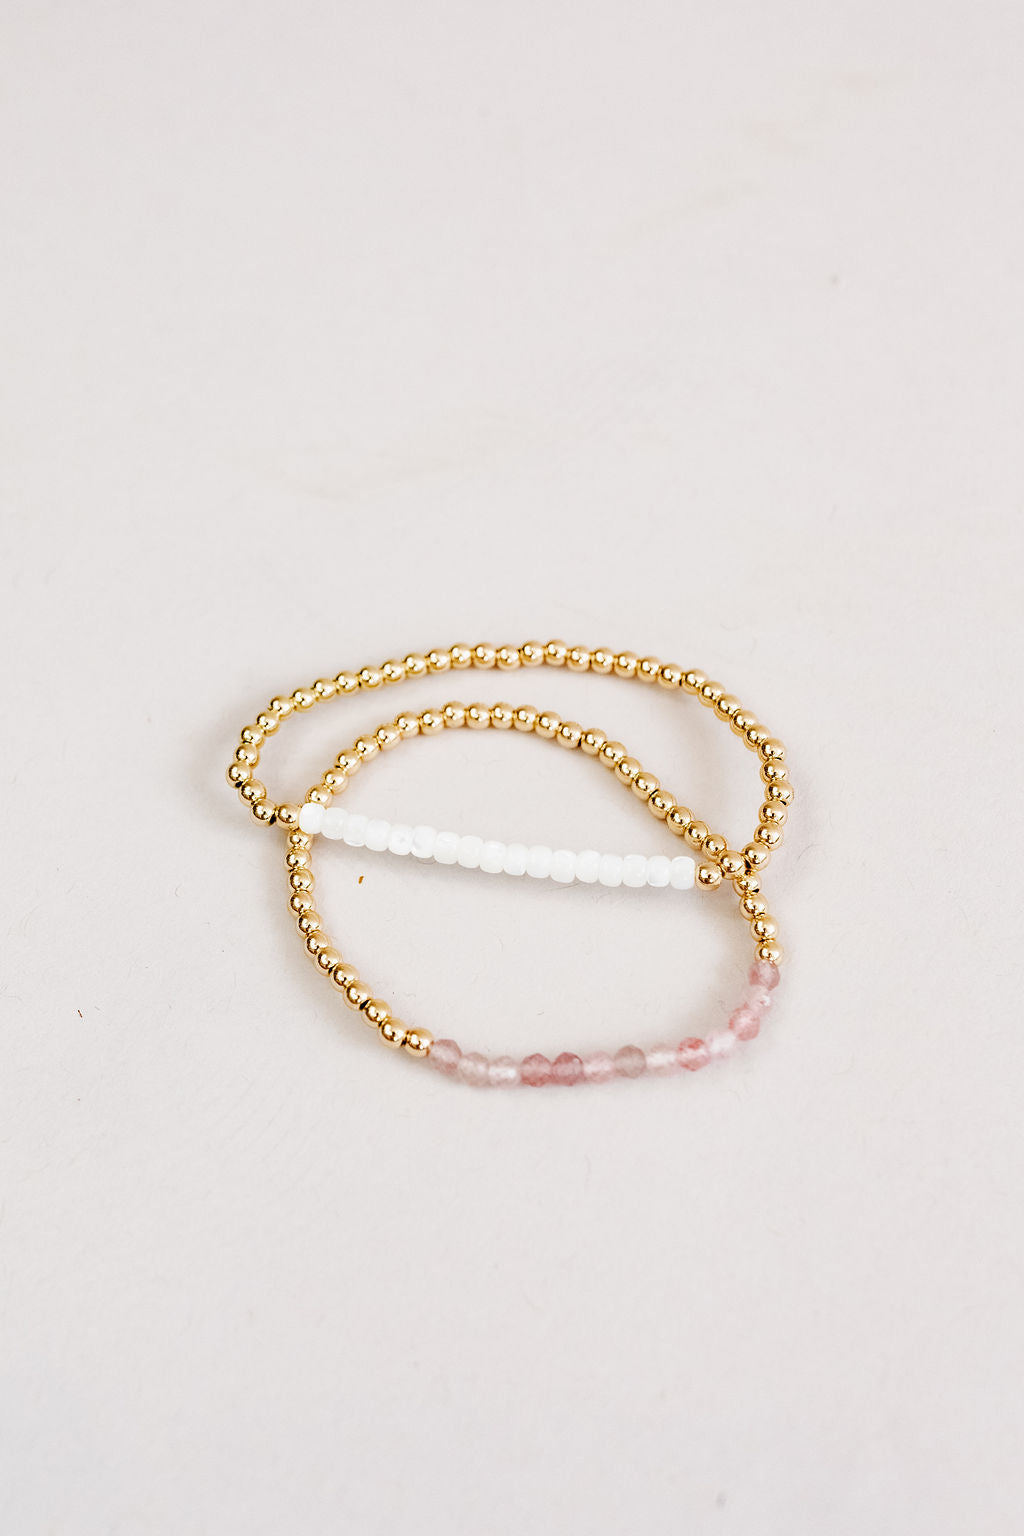 Crystal & Gold Stackable Beaded Stretch Bracelets | Assorted - Poppy and Stella